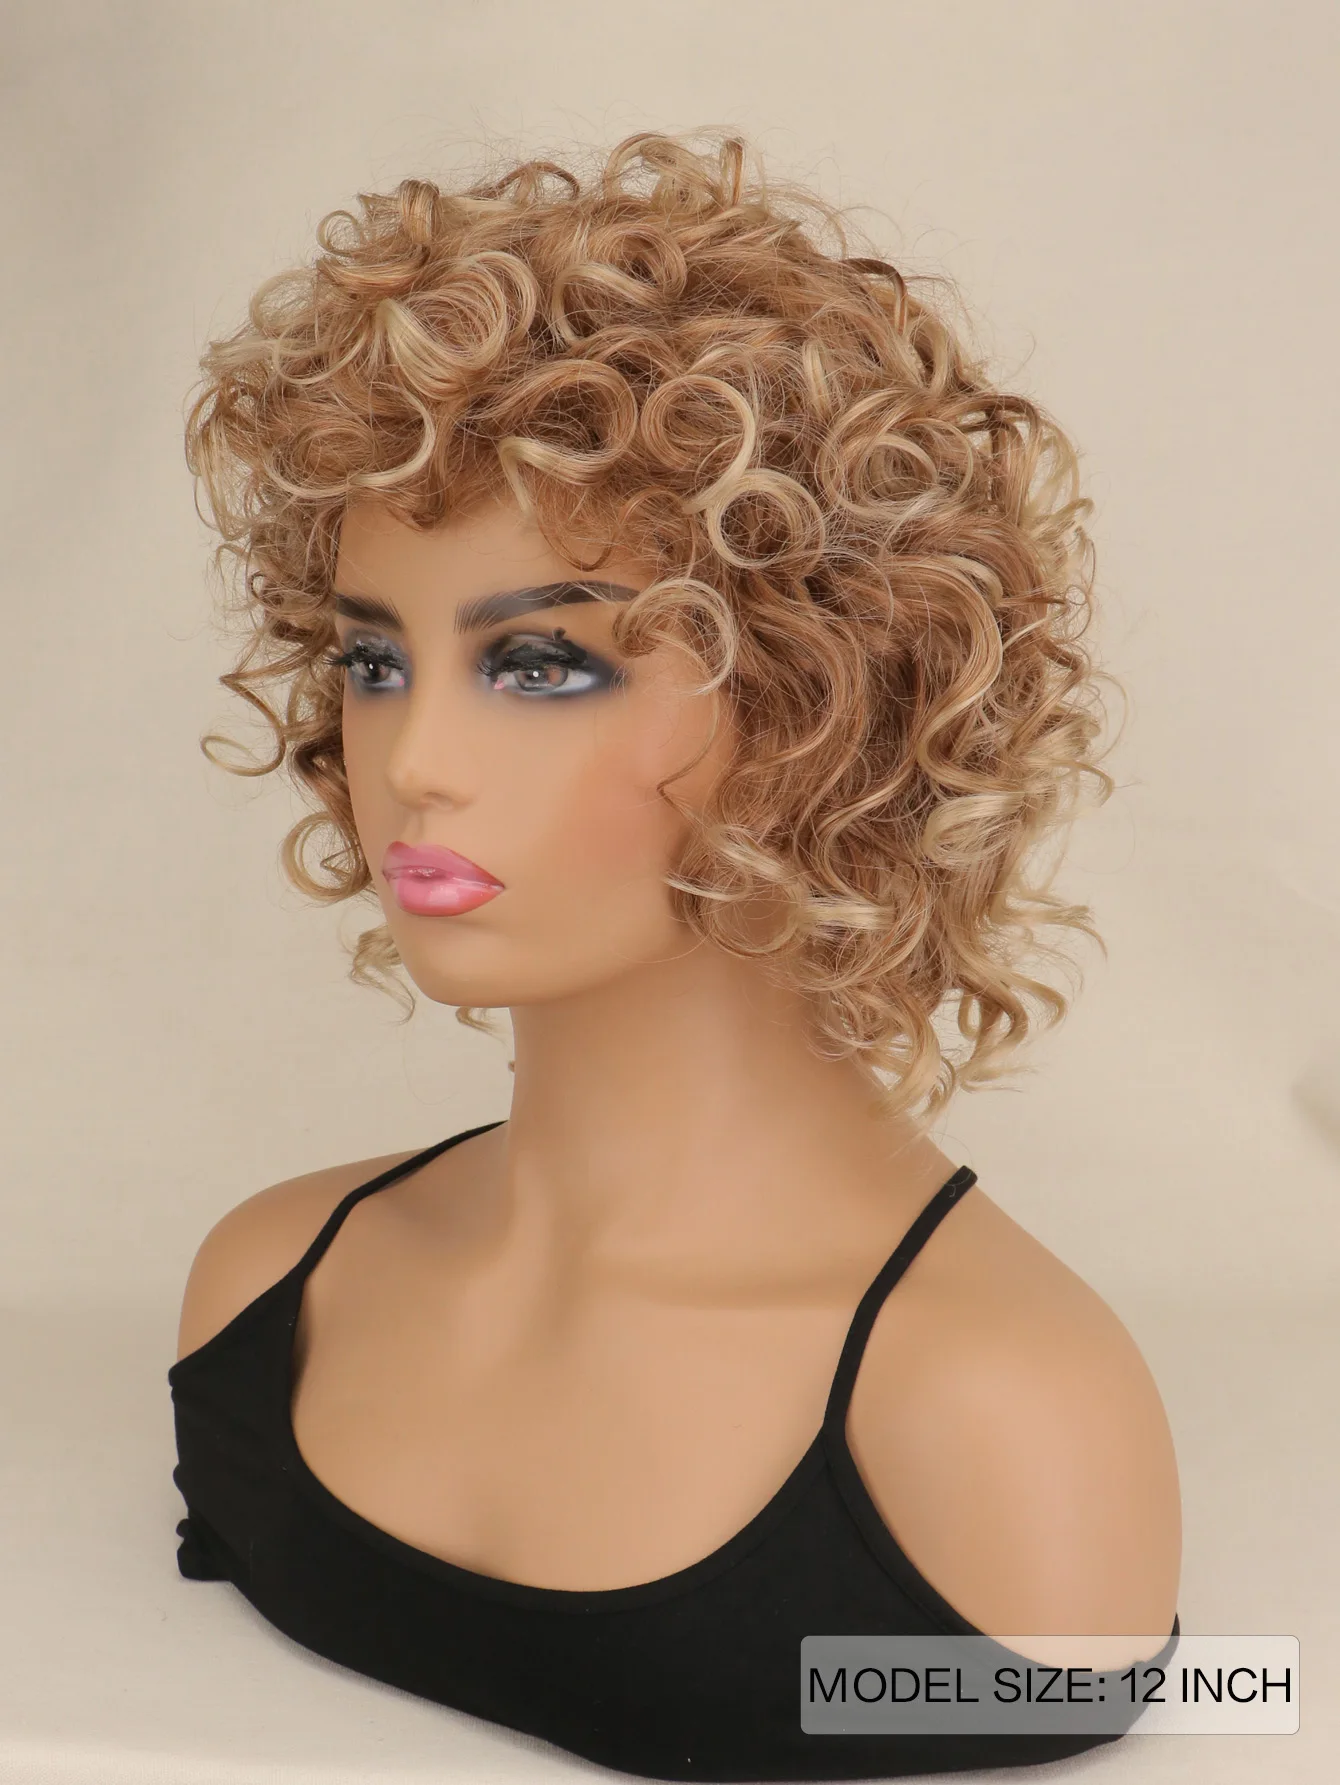 WHIMSICAL W Synthetic Women Mixed Blonde Brown Short Curly Wigs Natural Hair Wigs Heat Resistant Hair Wig for Women